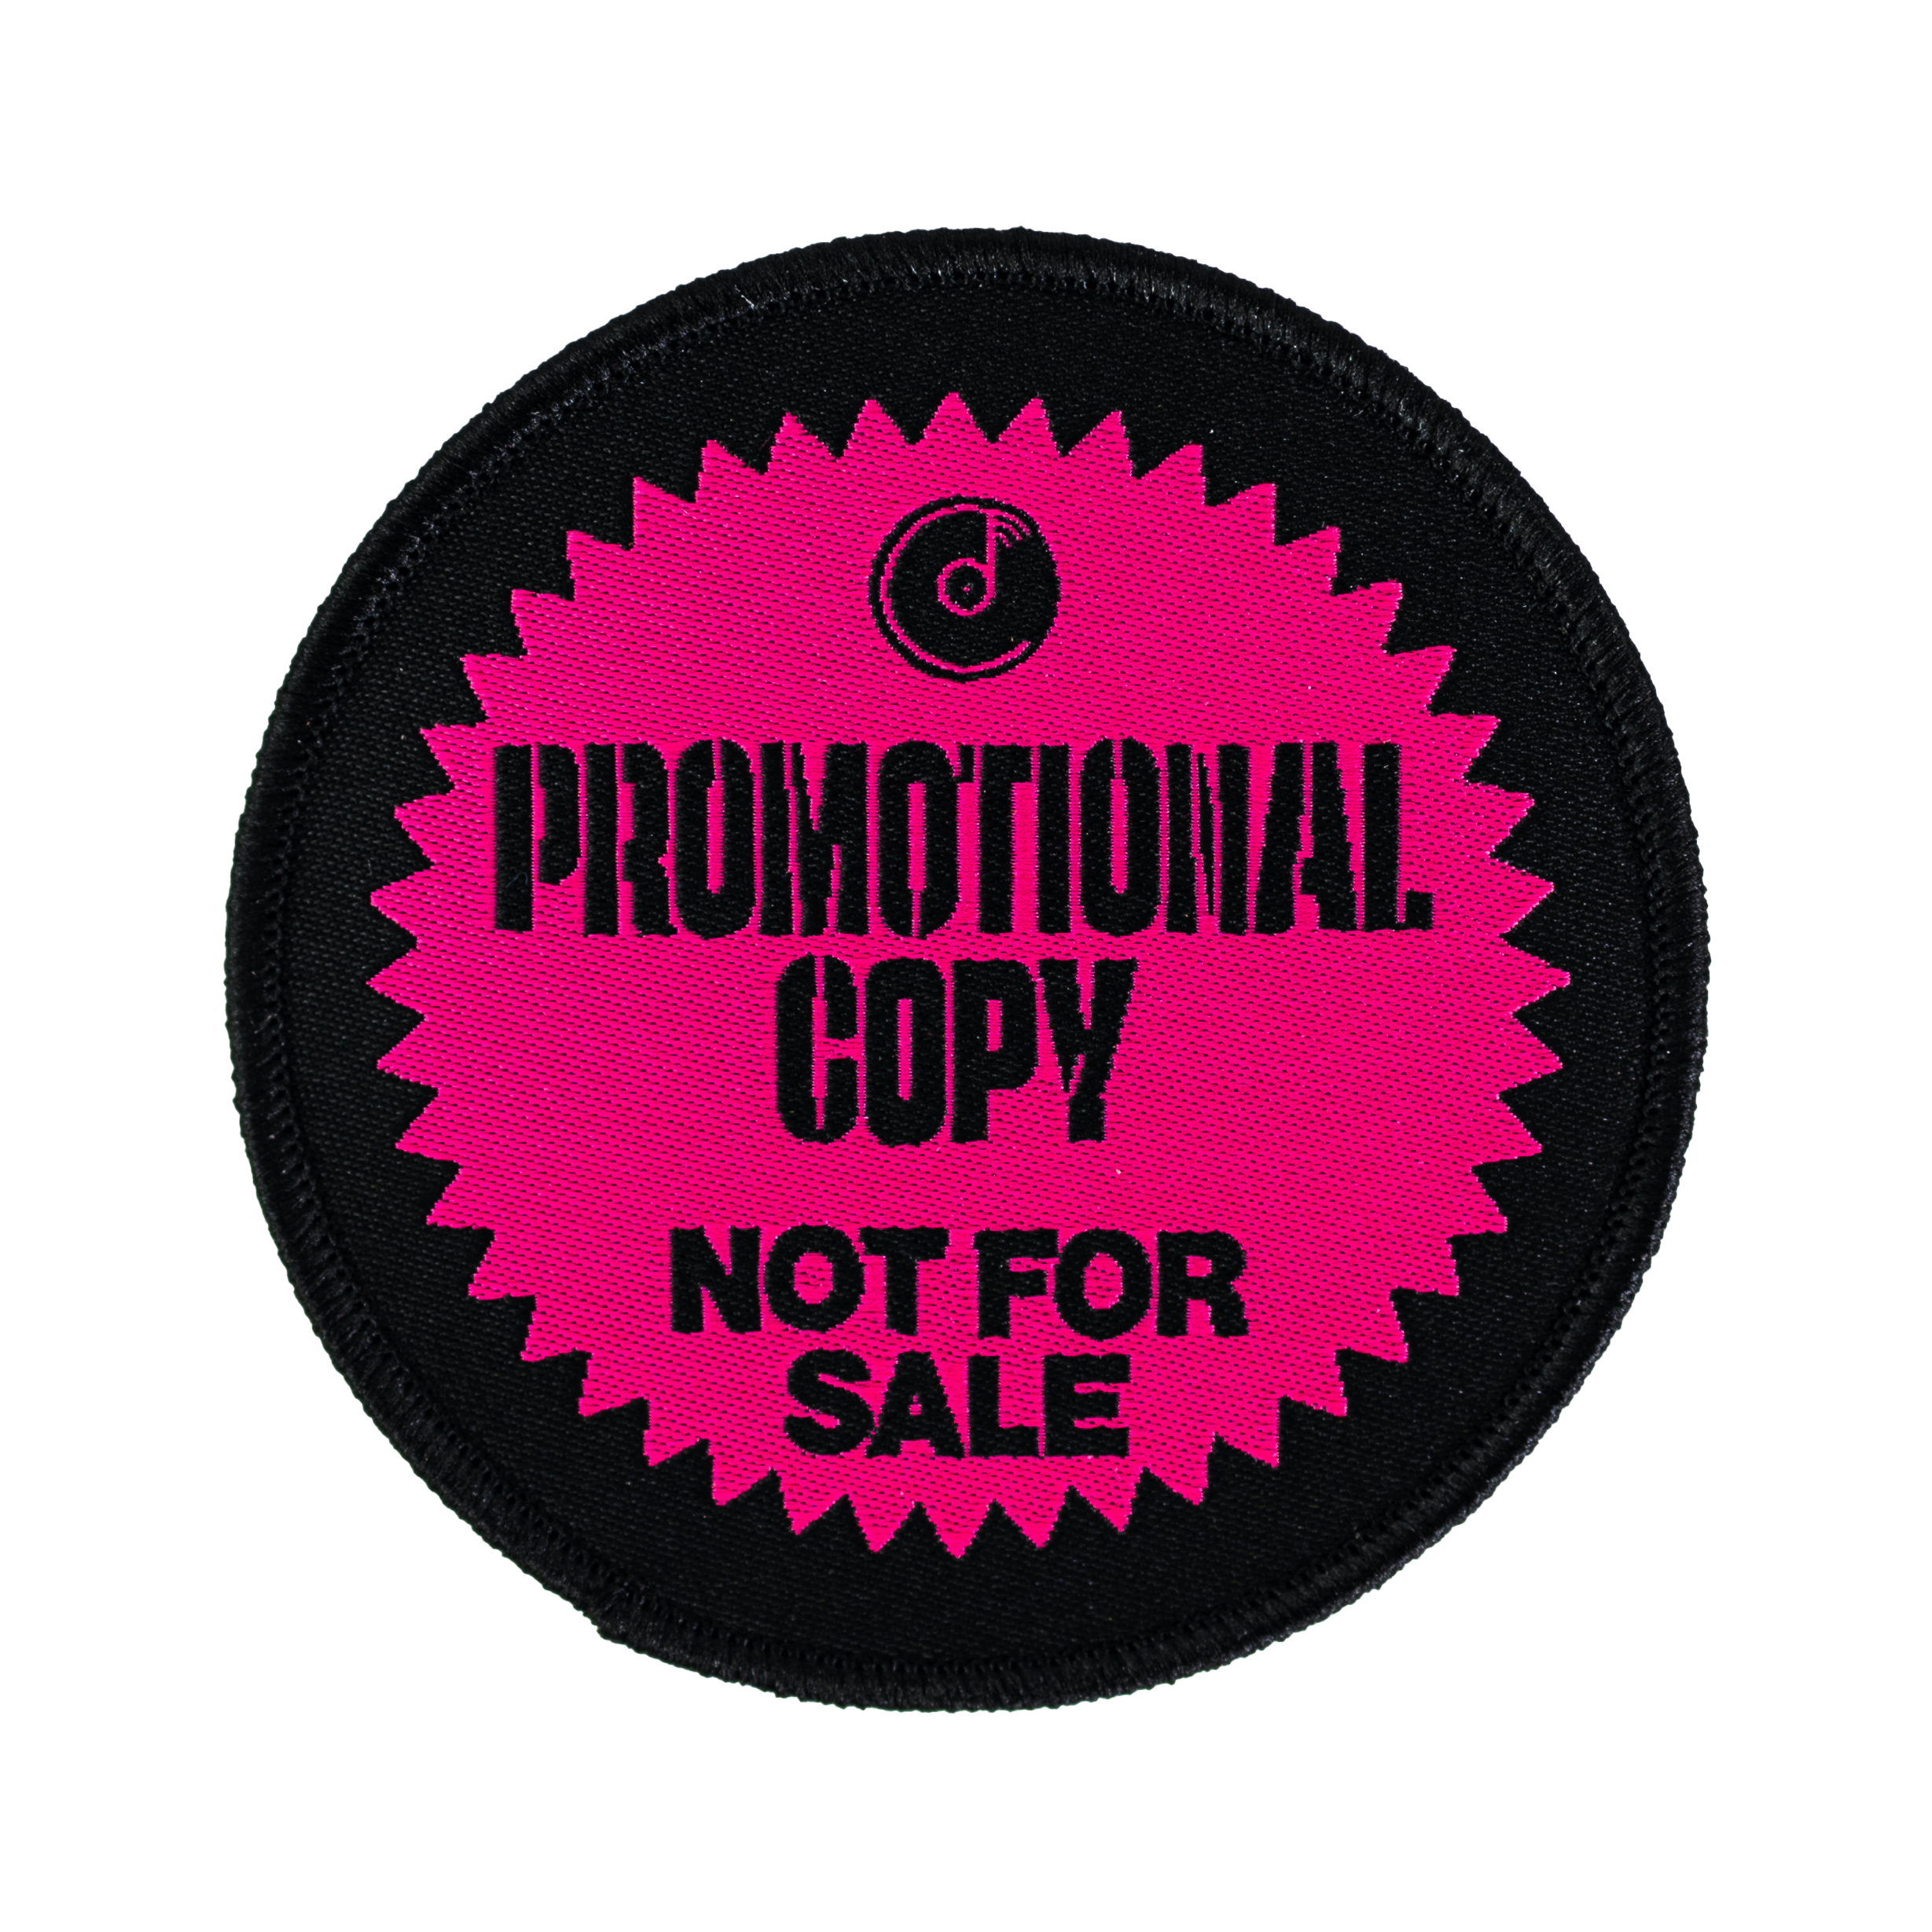 Promotional Copy Not For Sale - Patch